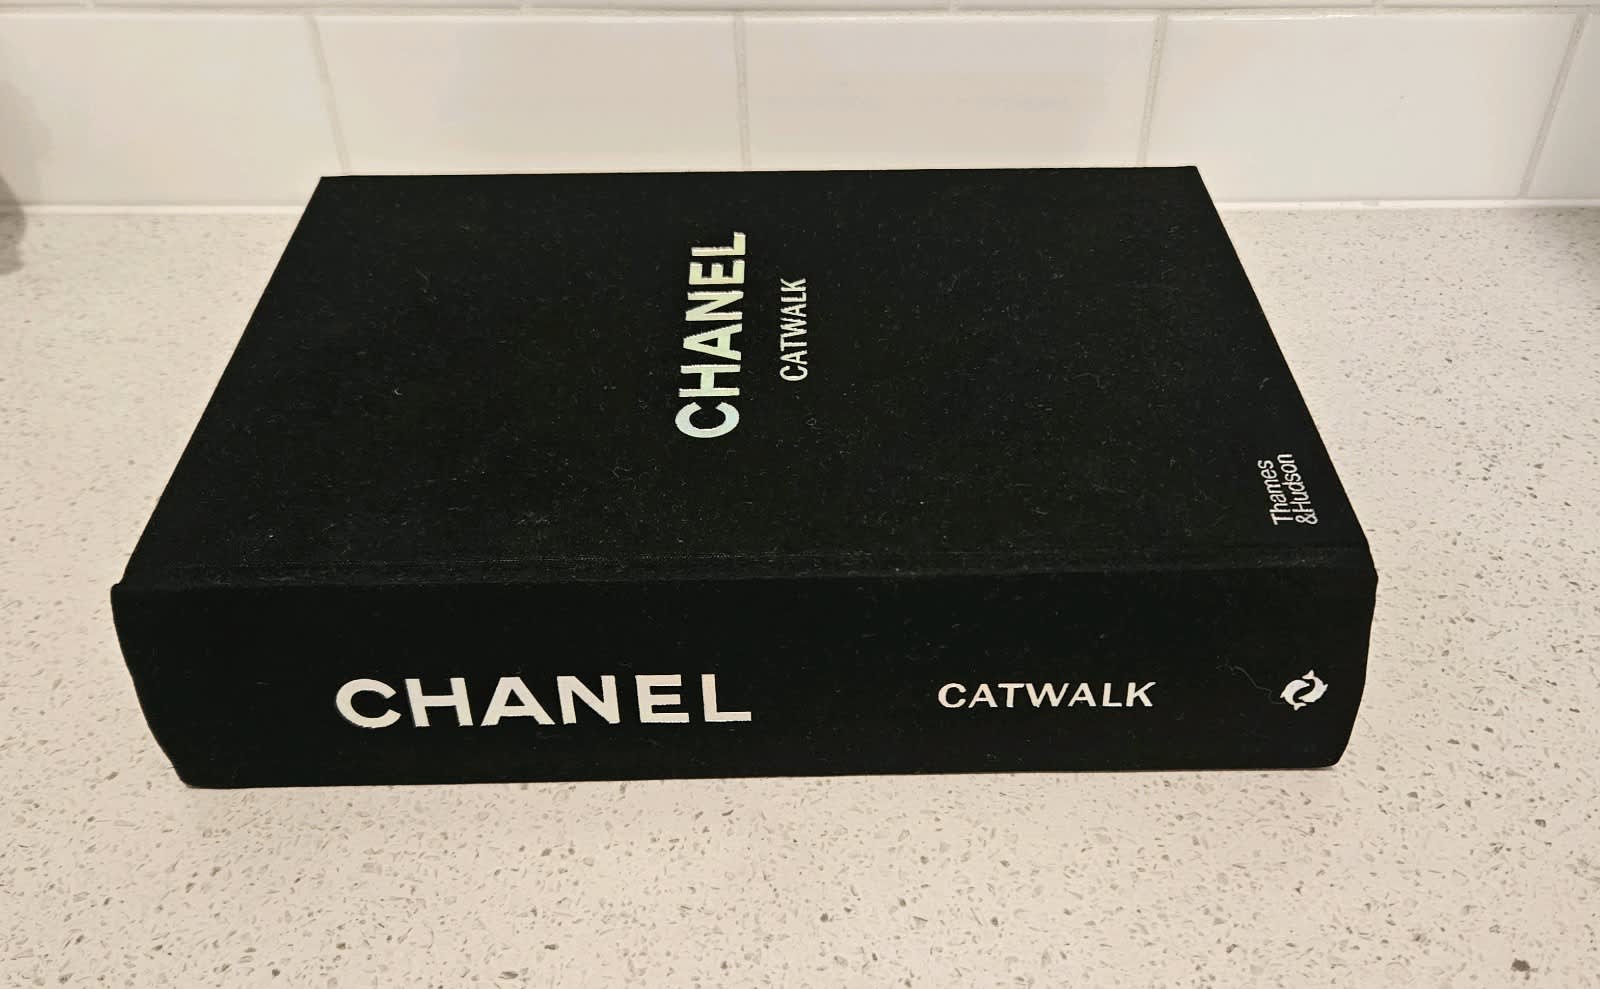 Chanel Catwalk The Complete Collection Hardcover book by Patrick Mauriés  and Adélia Sabatini  Catchcomau